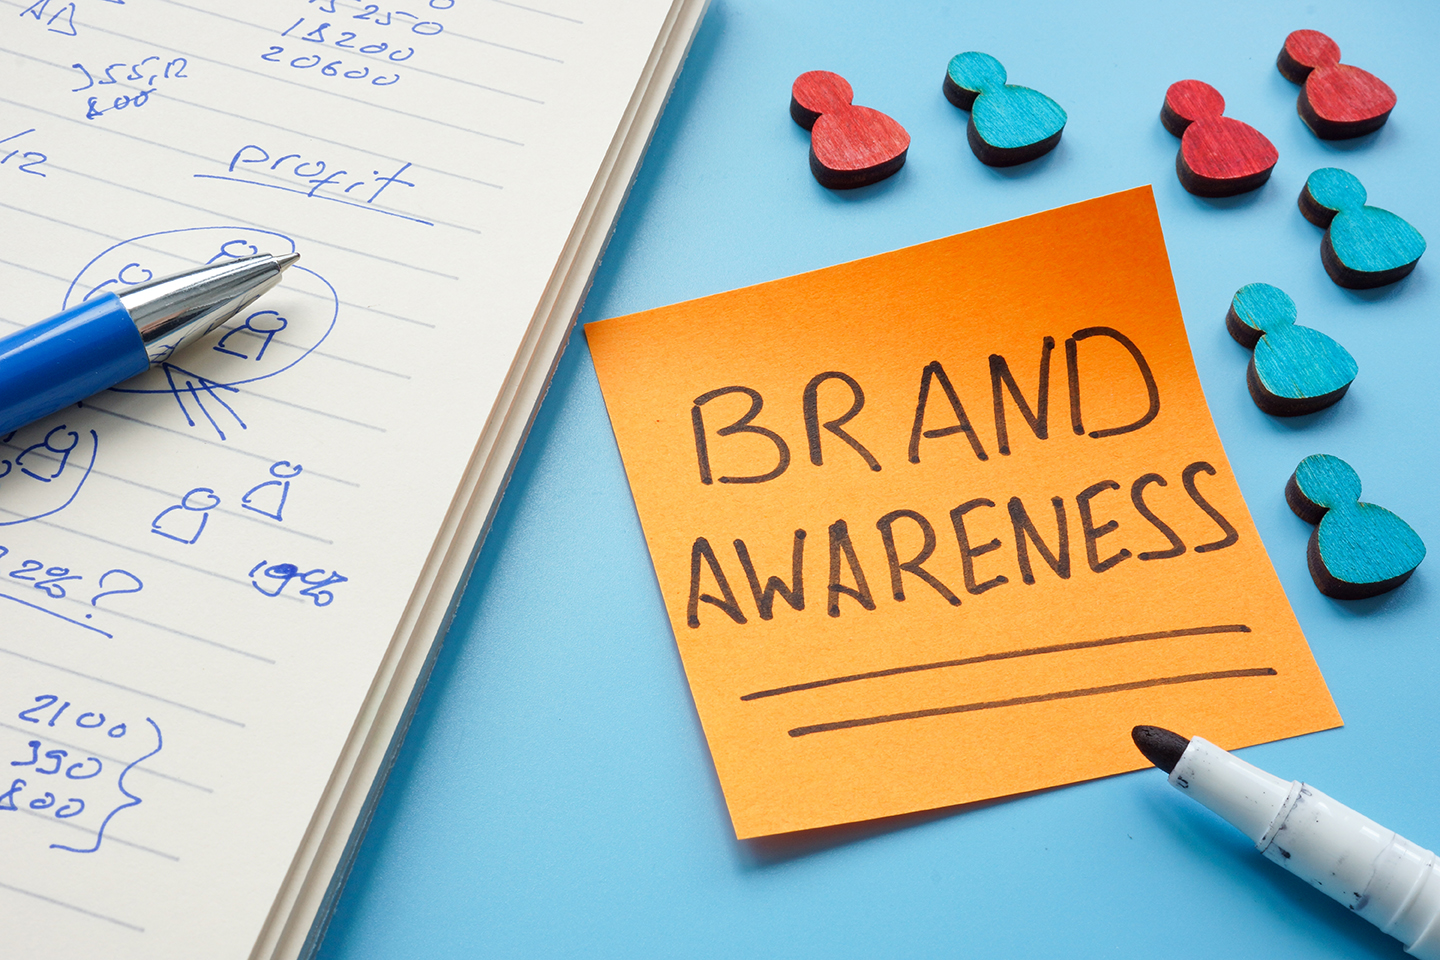 8 Ways to Maximize Brand Awareness Through Paid and Organic Search